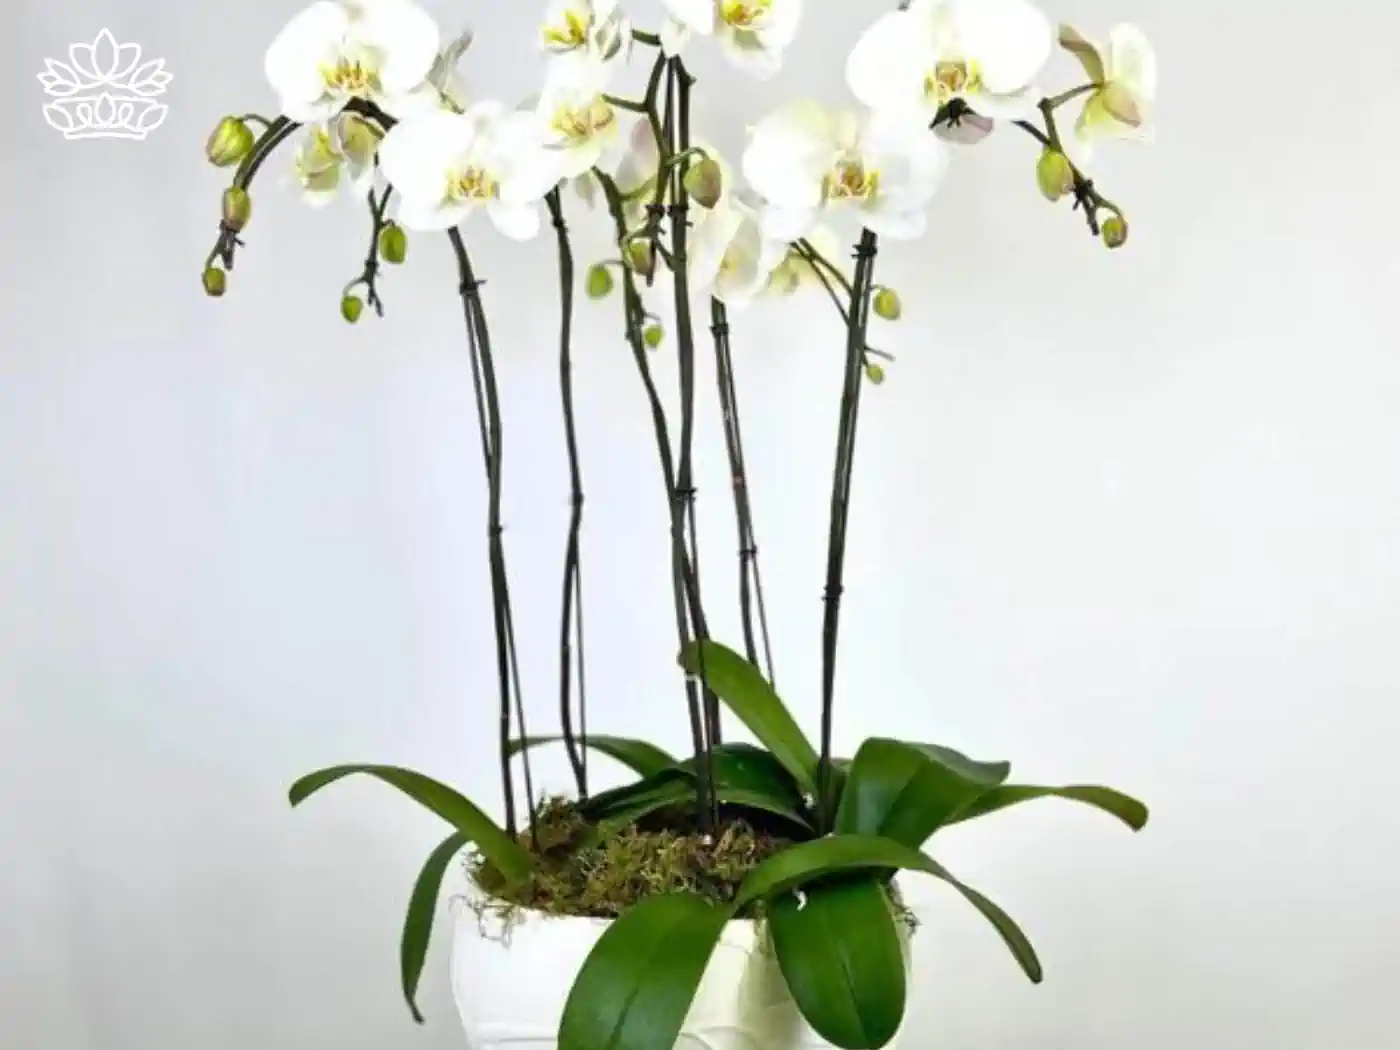 A potted white orchid plant in full bloom with green leaves, displayed in a white pot. Fabulous Flowers and Gifts - Orchids Collection.